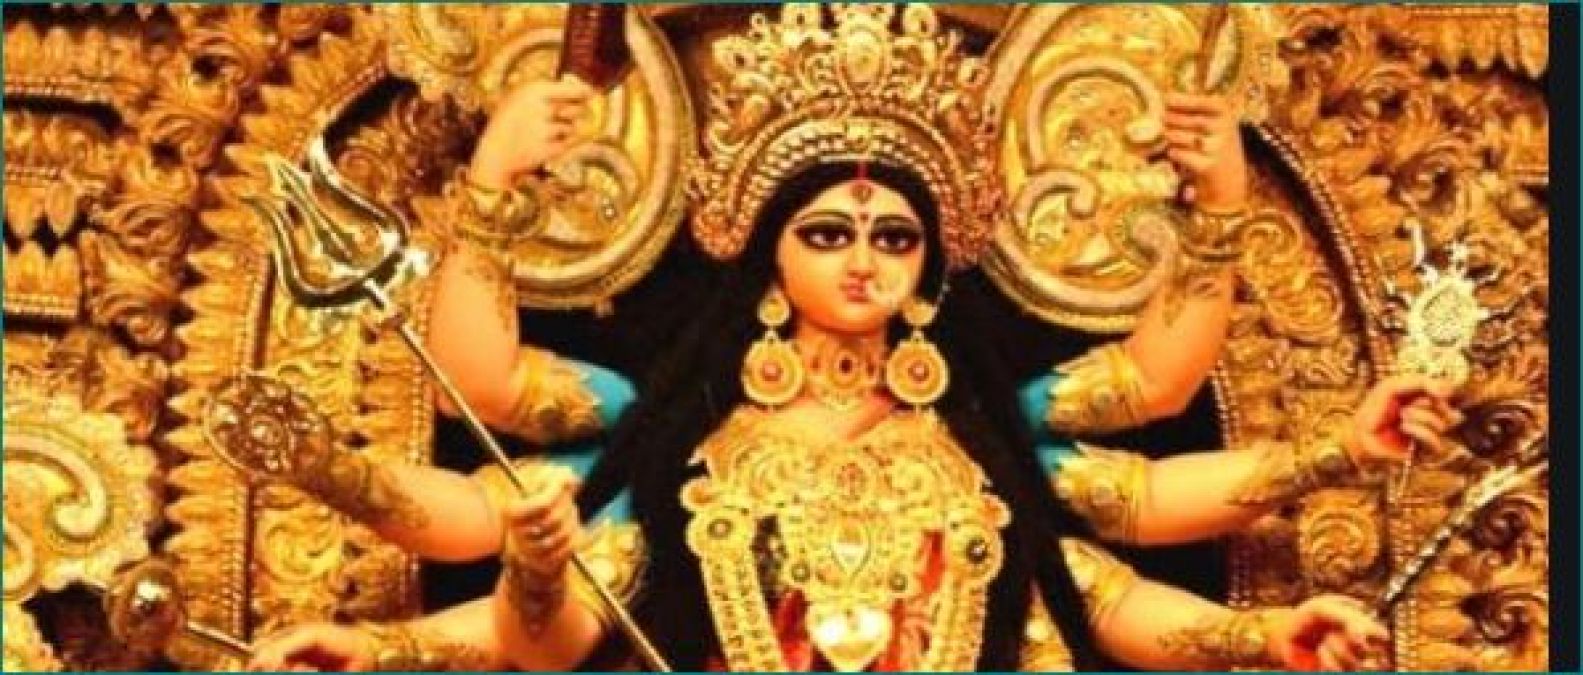 Gupt Navratri is from February 12, know Puja Vidhi and Samagri